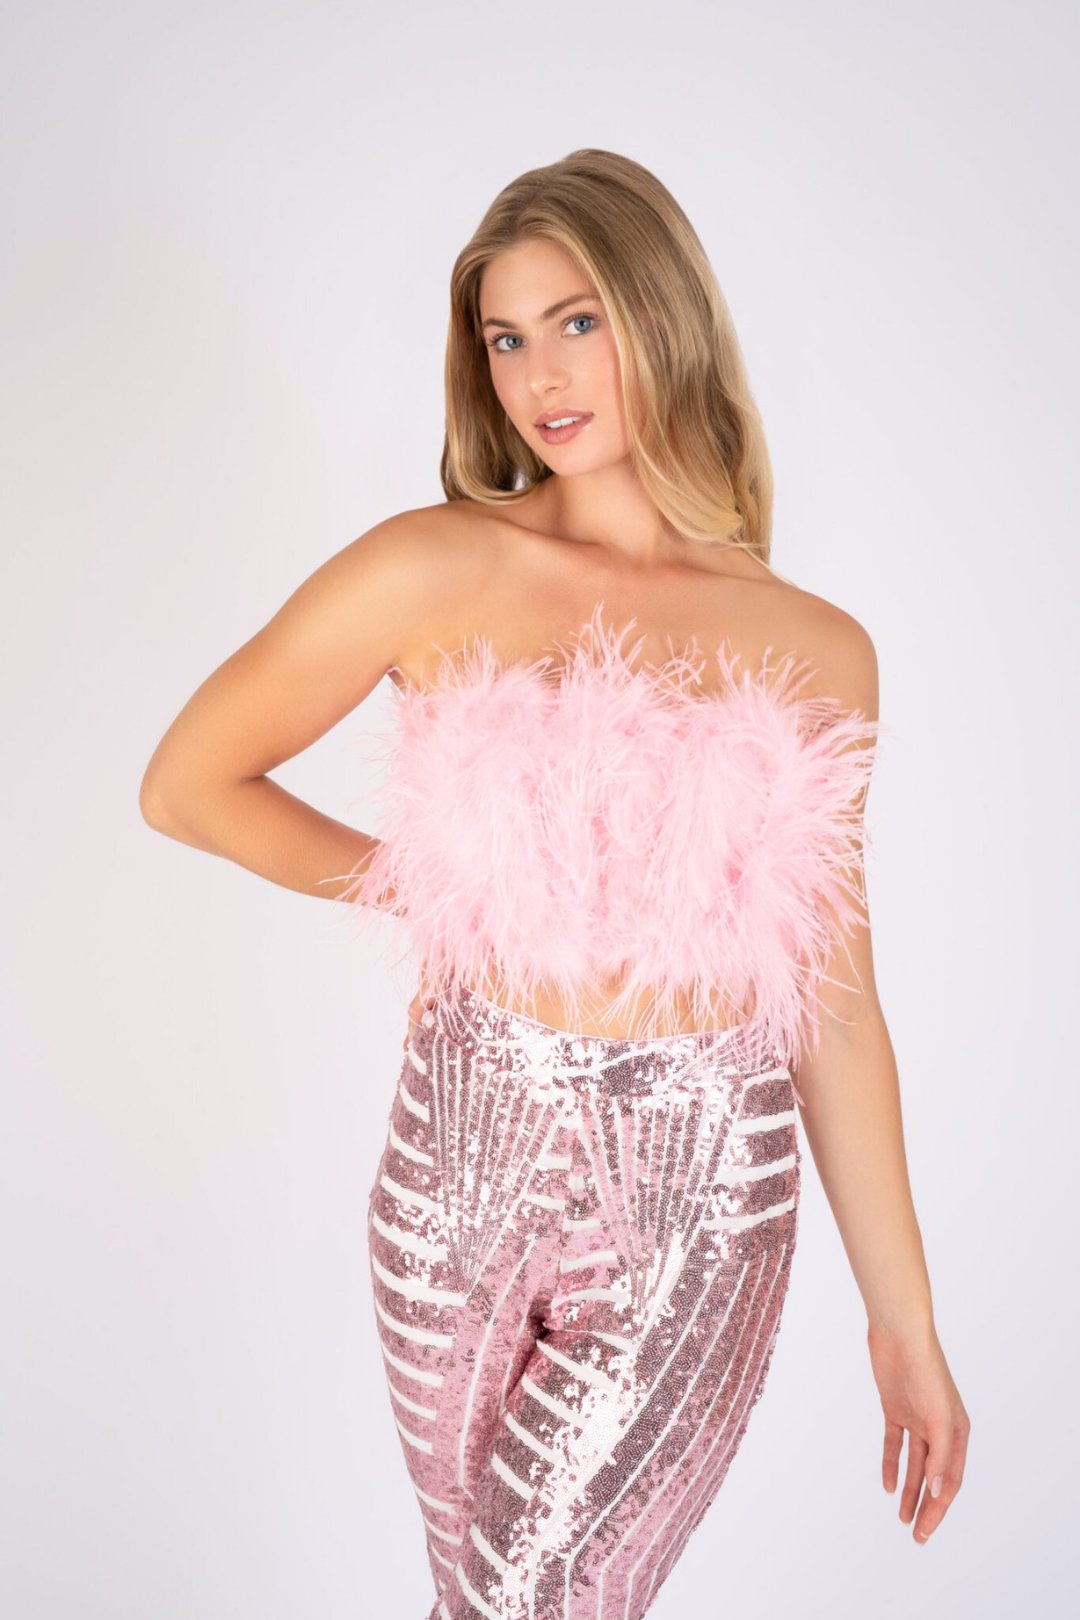 The Daisy Ostrich Feather Top: Baby Pink (Custom) - Pinkaholics Anonymous